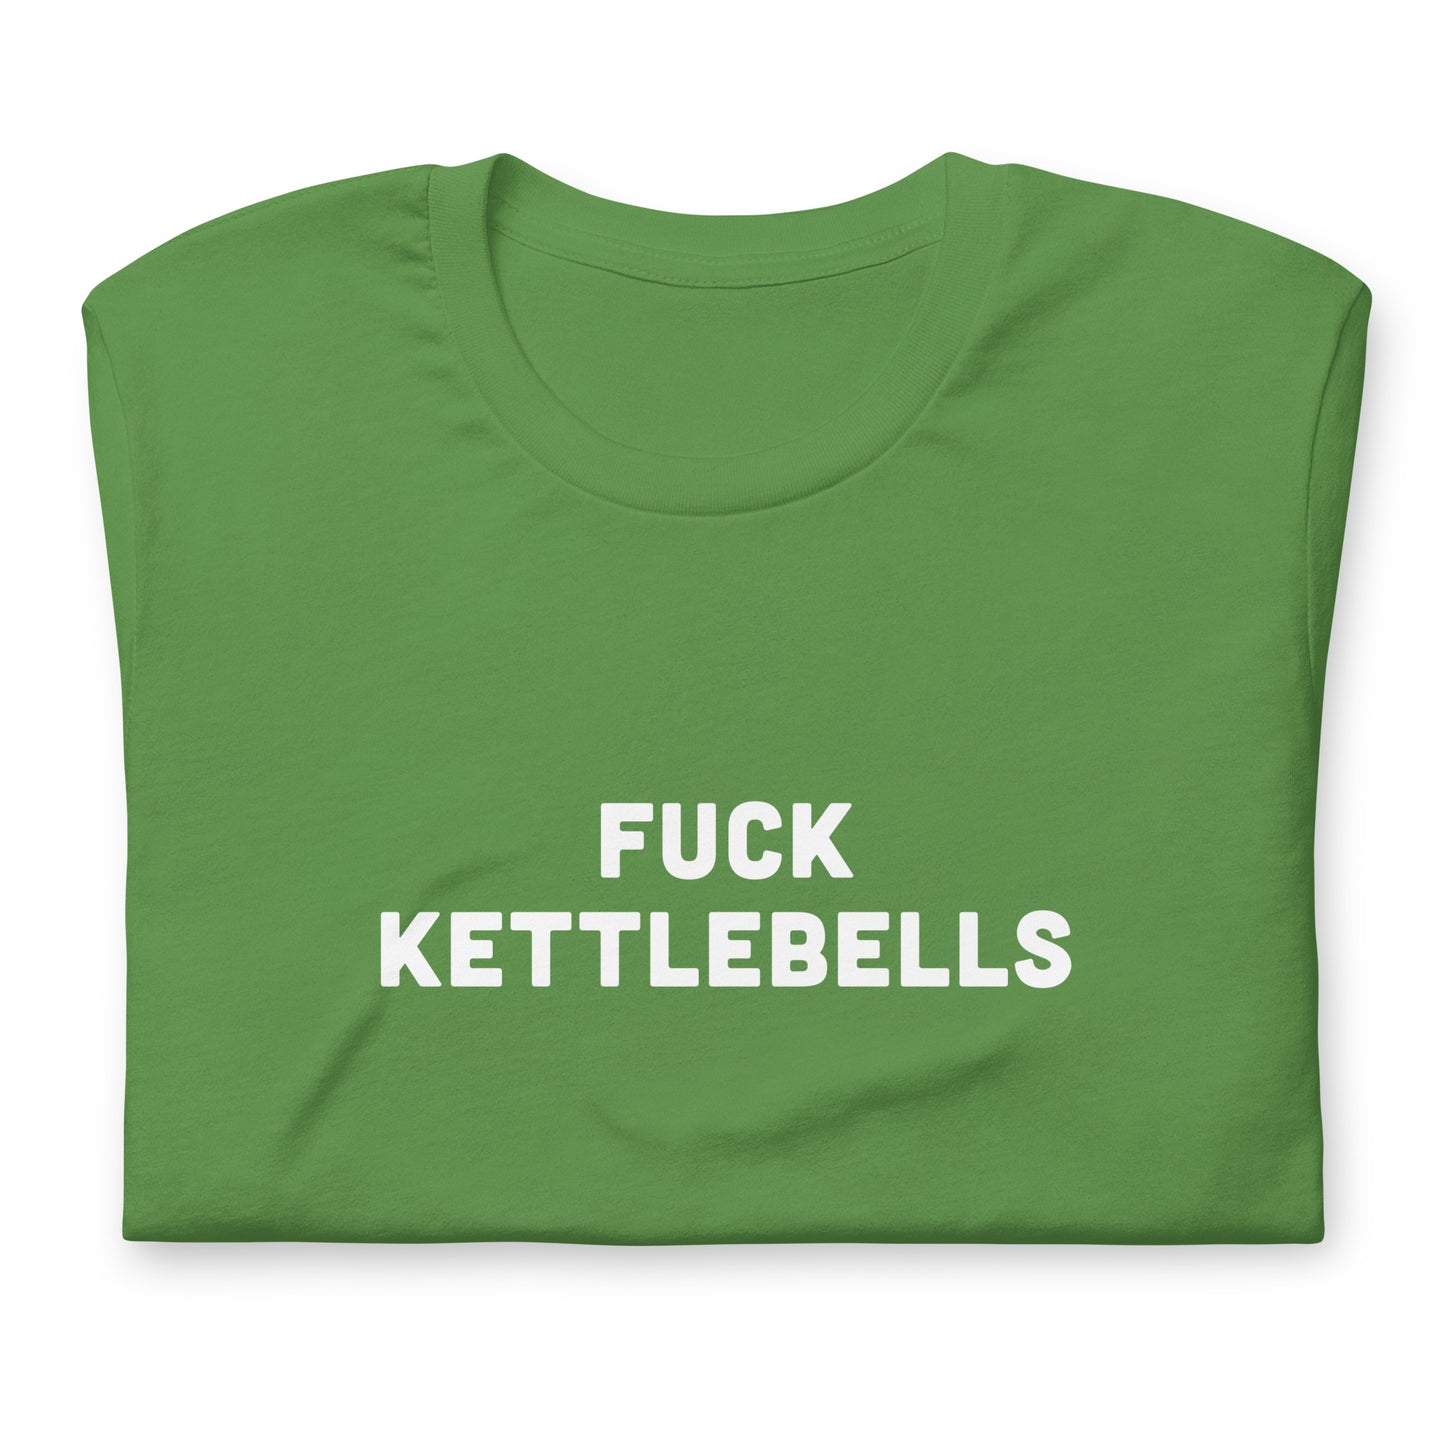 Fuck Kettlebells T-Shirt Size S Color Forest